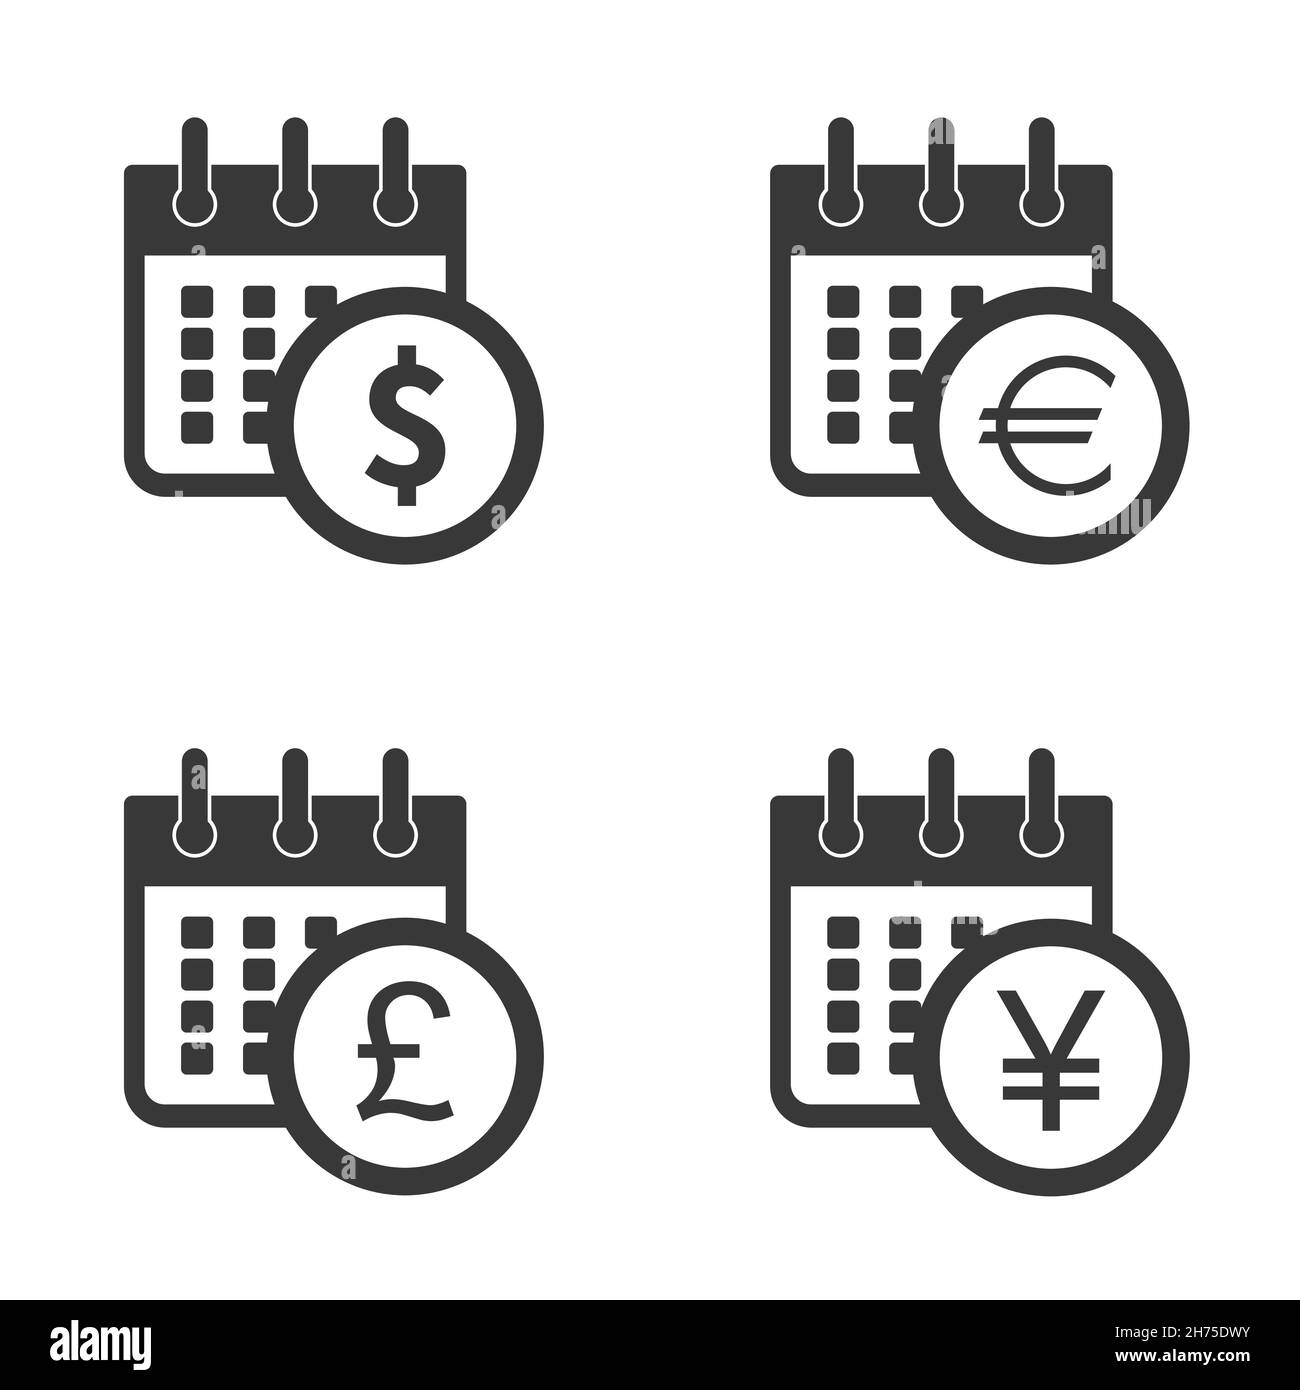 Usd dollar, euro, pound, yen currencies on calendar. Money symbols on calendar.Calendar currencies finance reminder signs. Calendar important days. Stock Vector